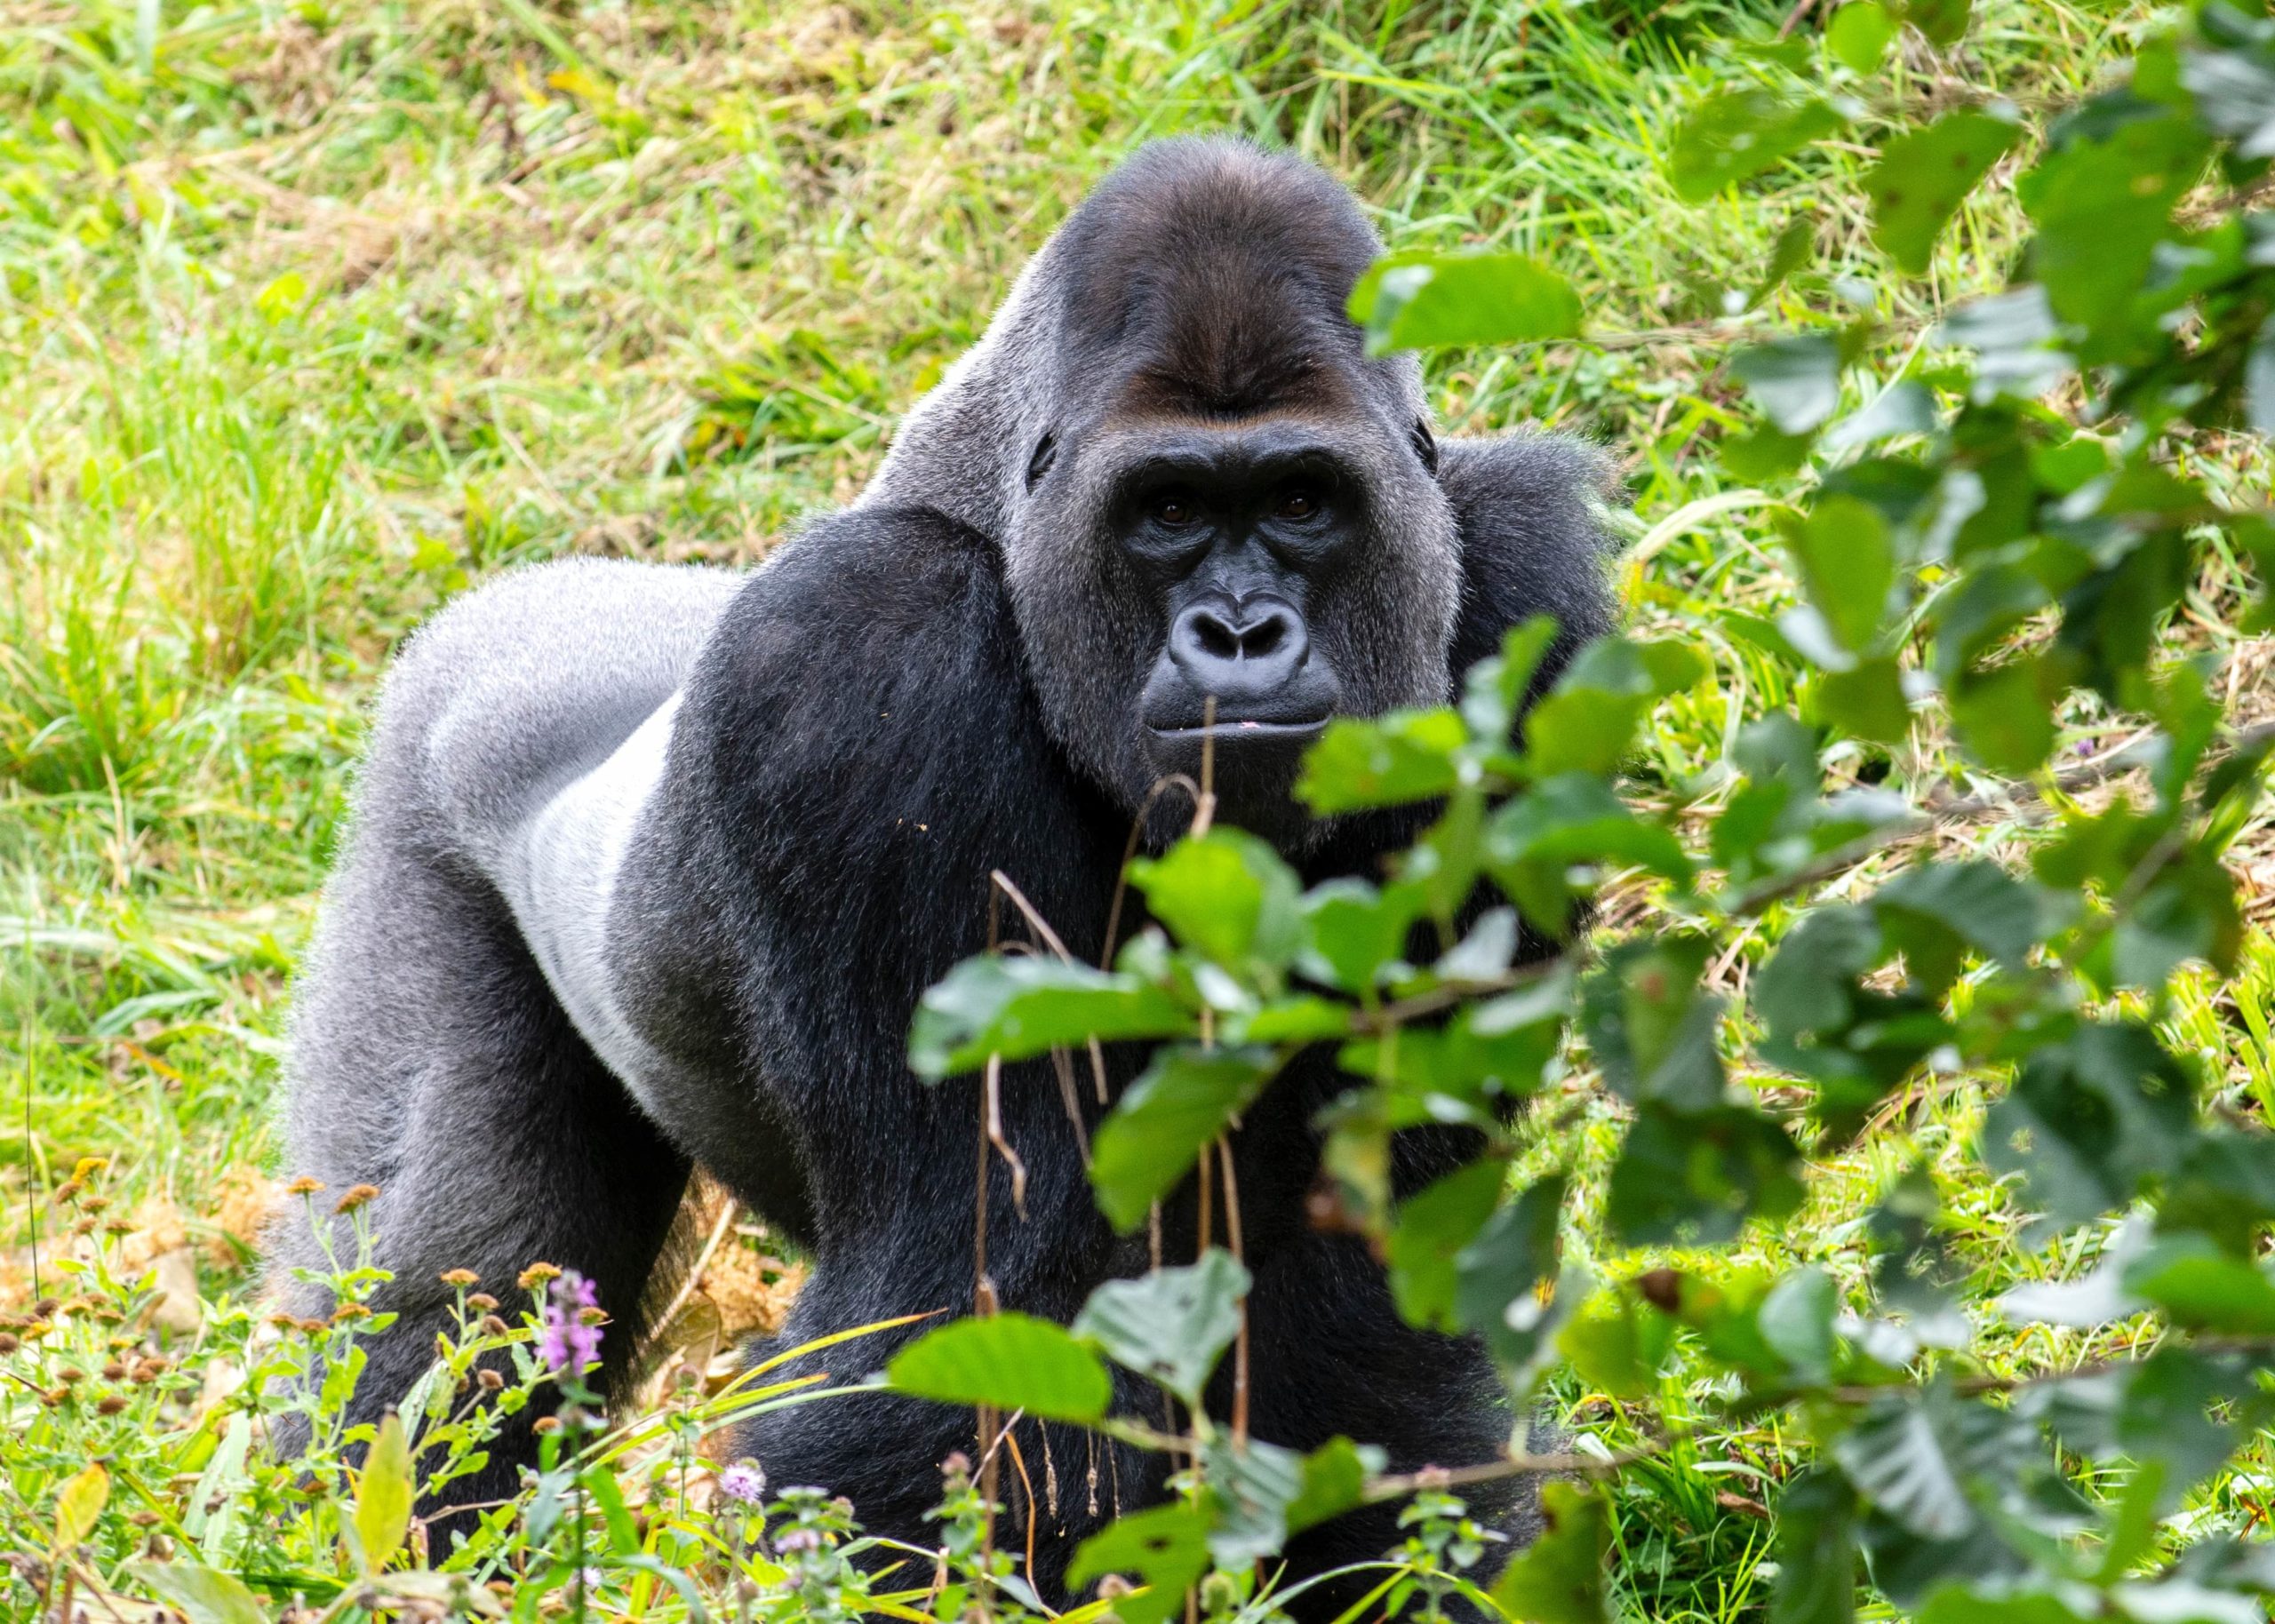 Climate change affects the relationship between chimps and gorillas in the wild